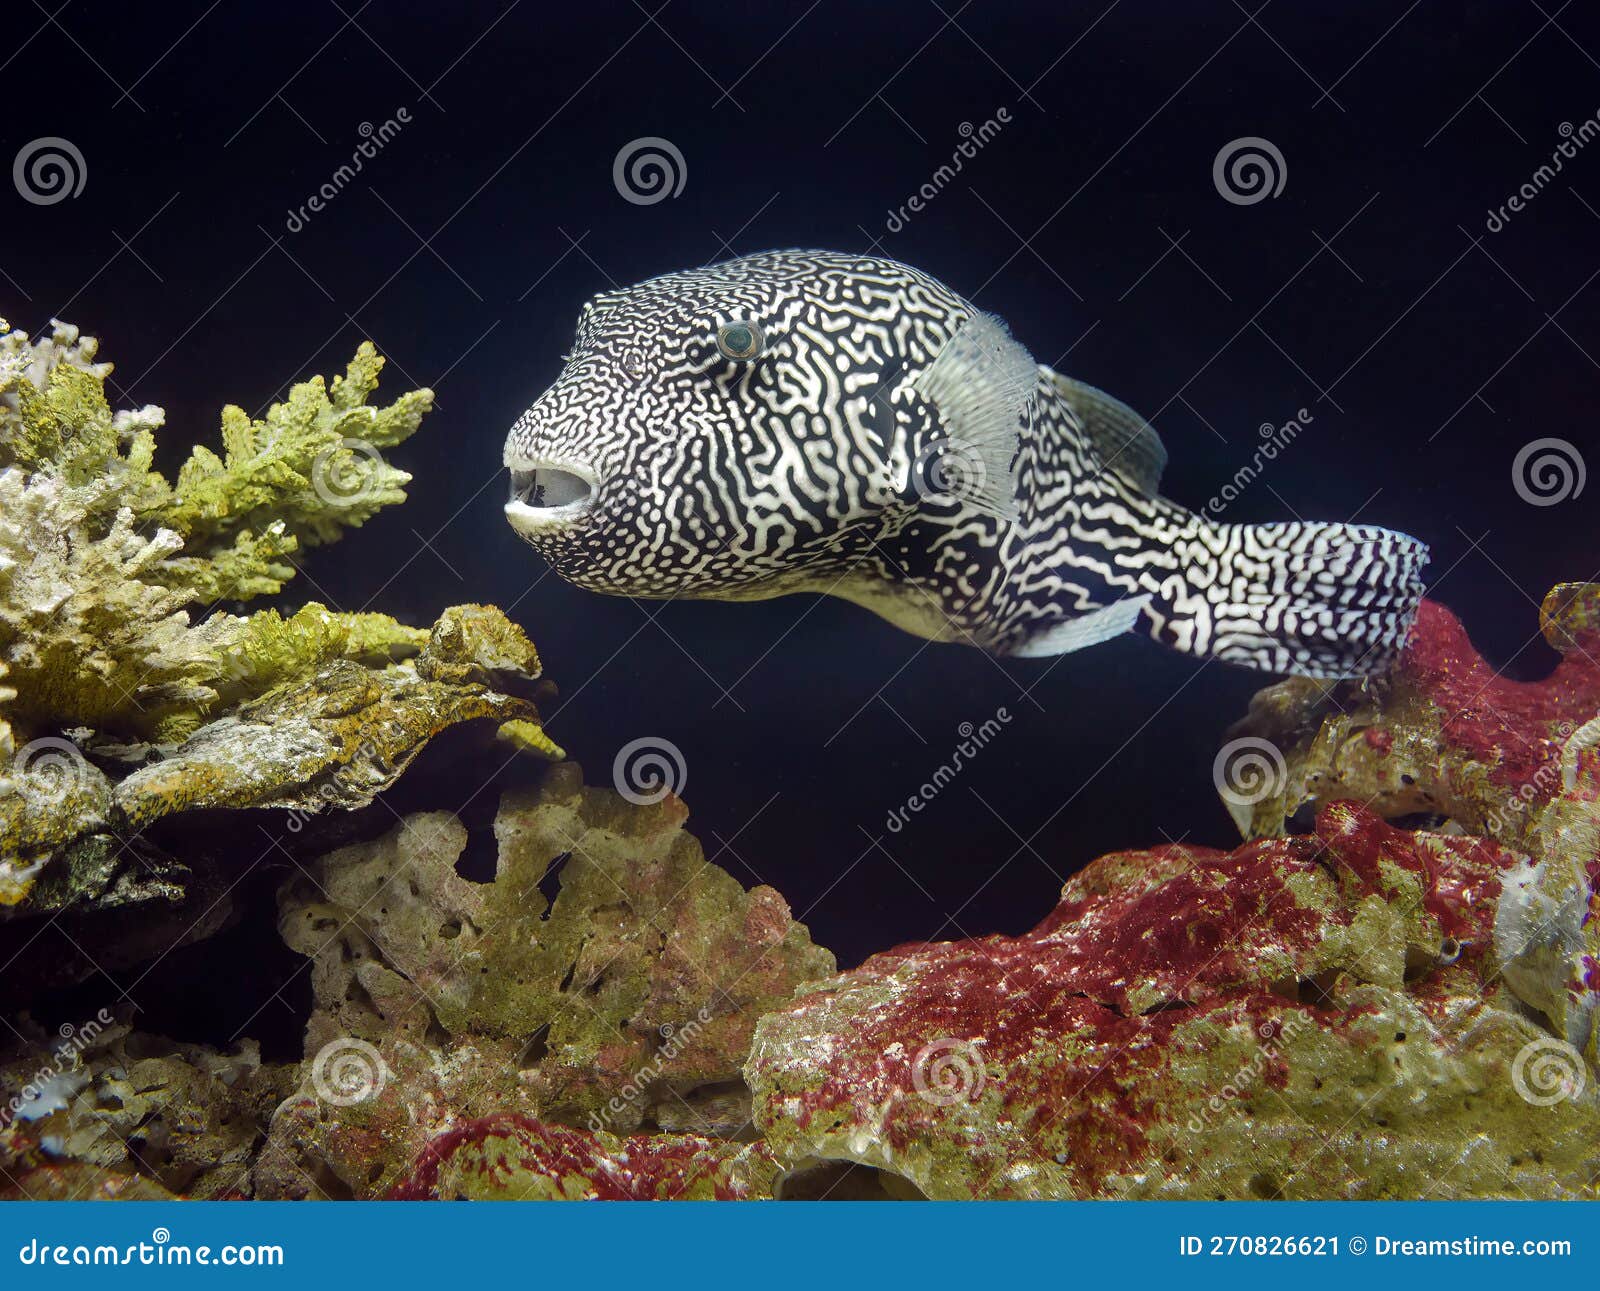 close up a map puffer fish with black and white pattern, underwater with corals ans stone background, arothron mappa